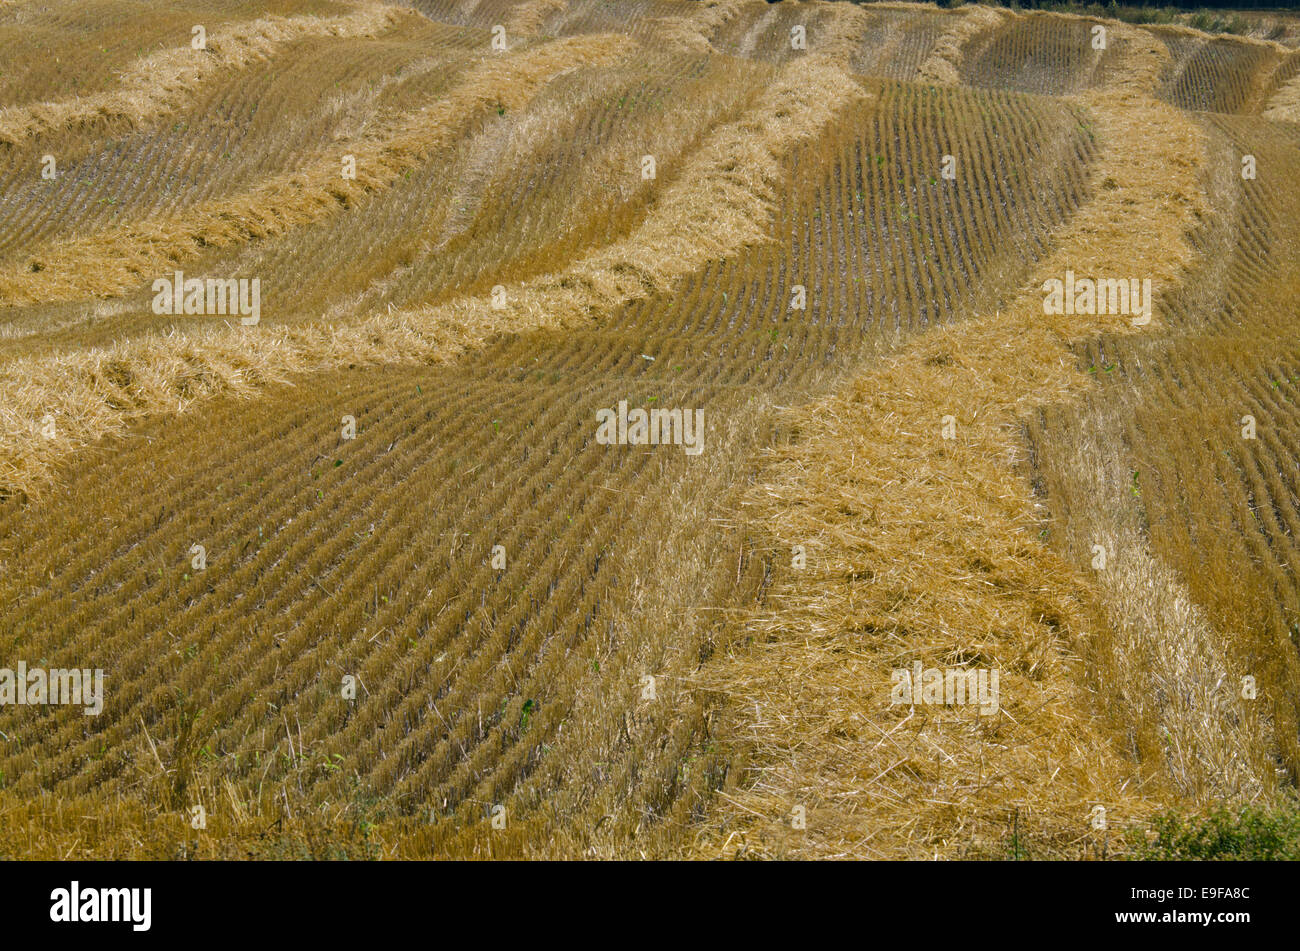 The compressed band on wheat field Stock Photo